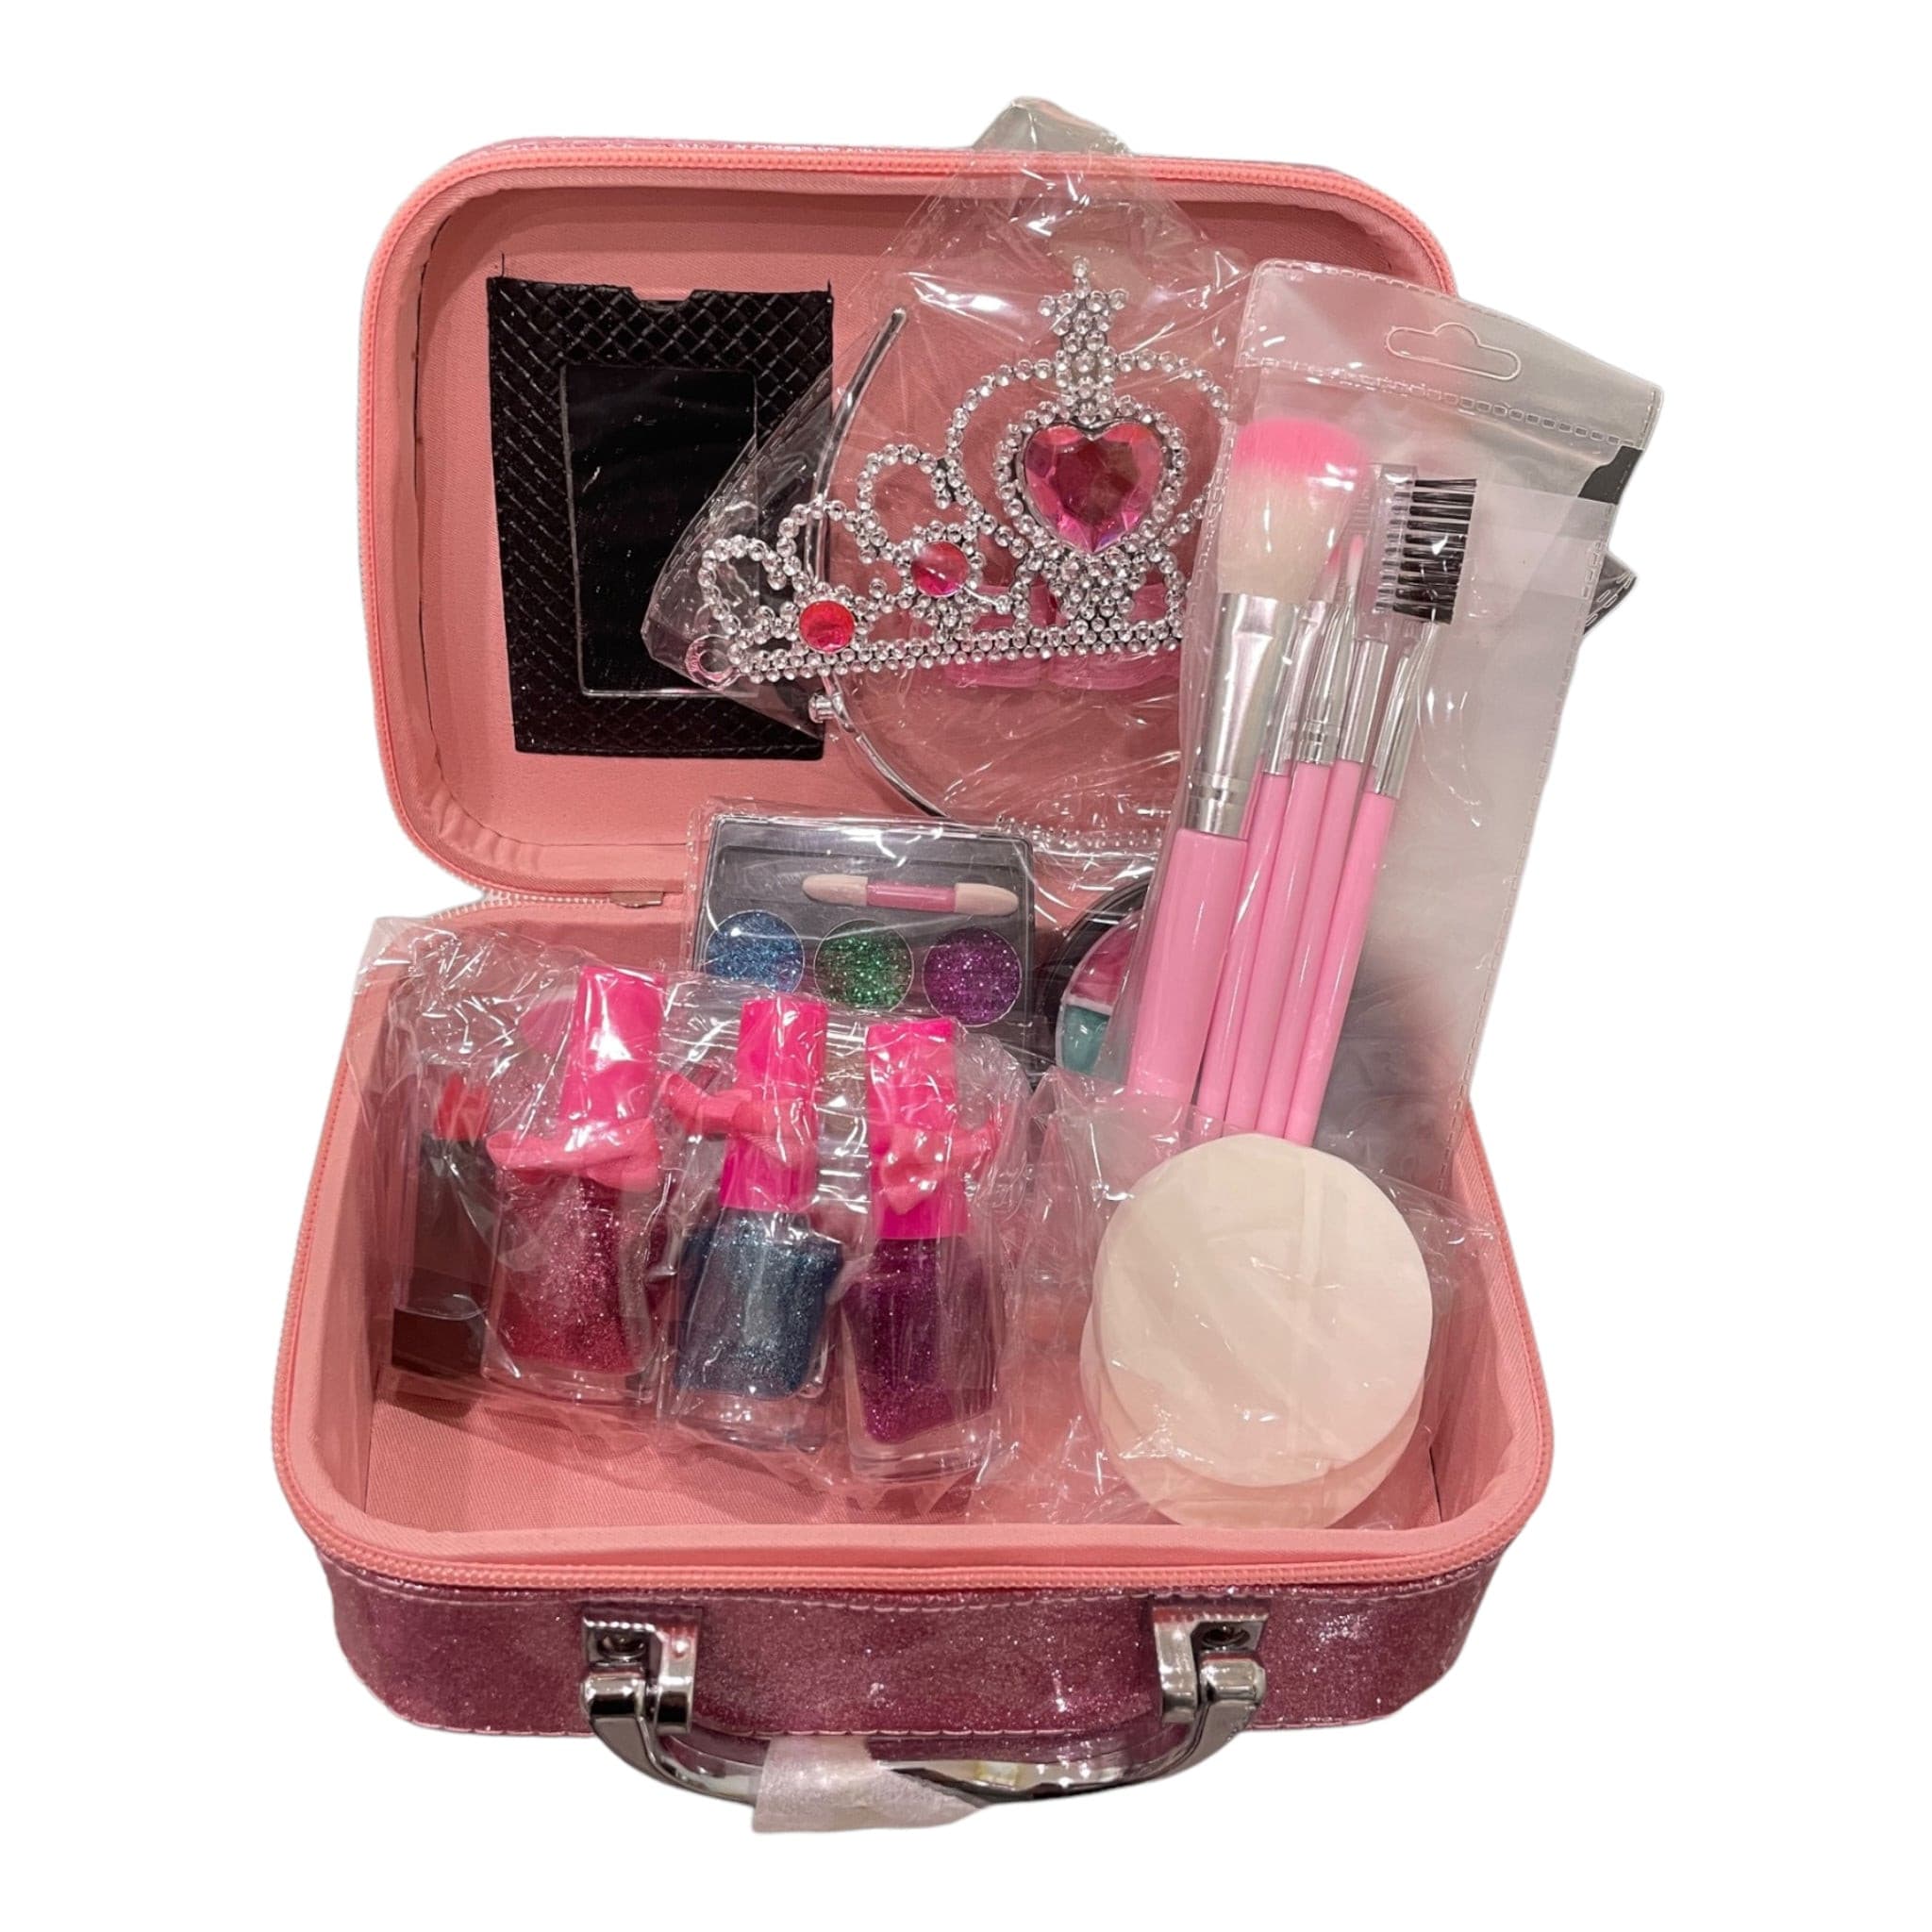 Kids Makeup All-In-One Beauty Children's Cosmetics Manicure Kit